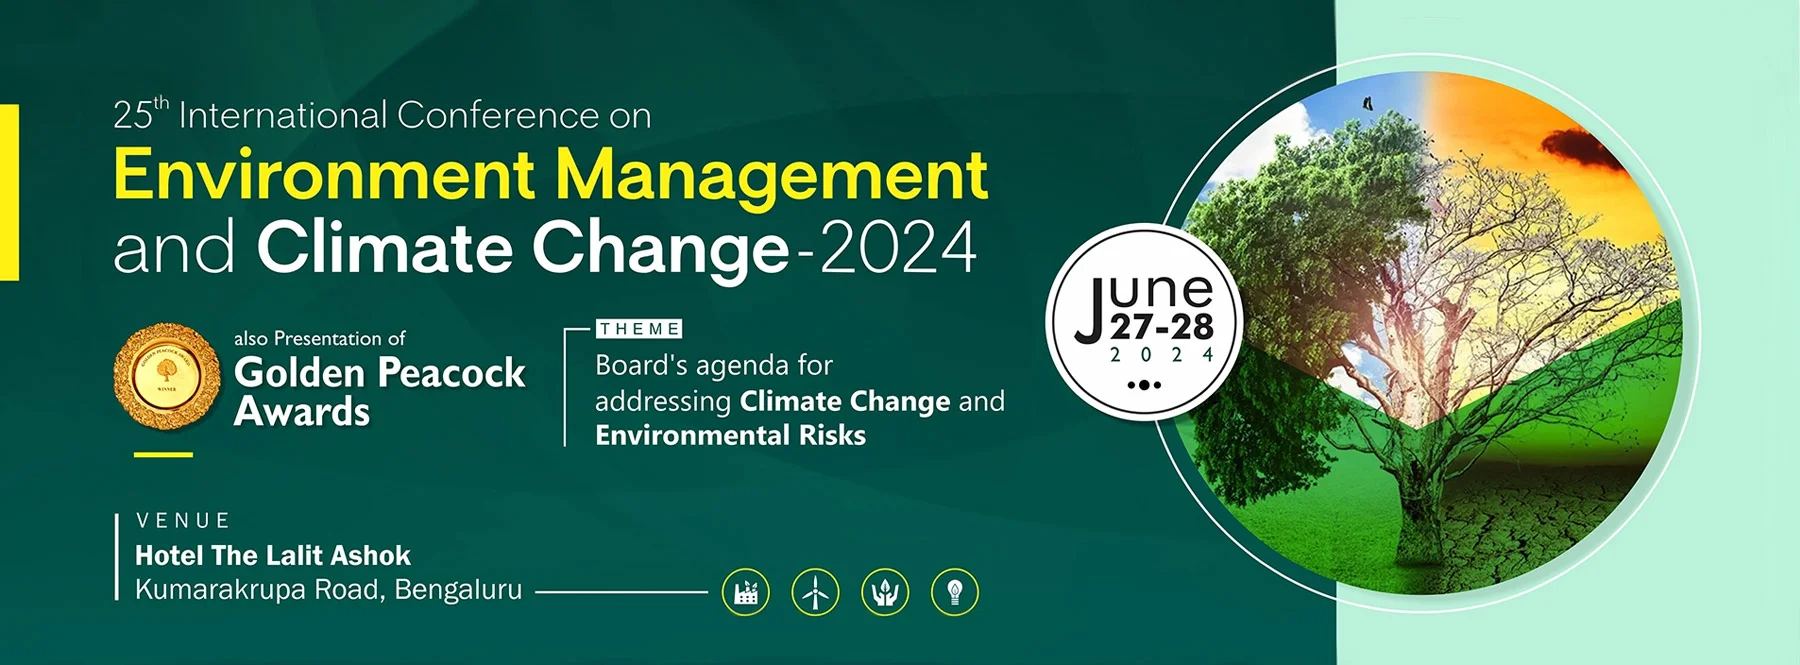 25th International Conference on Environment Management and Climate Change 2024